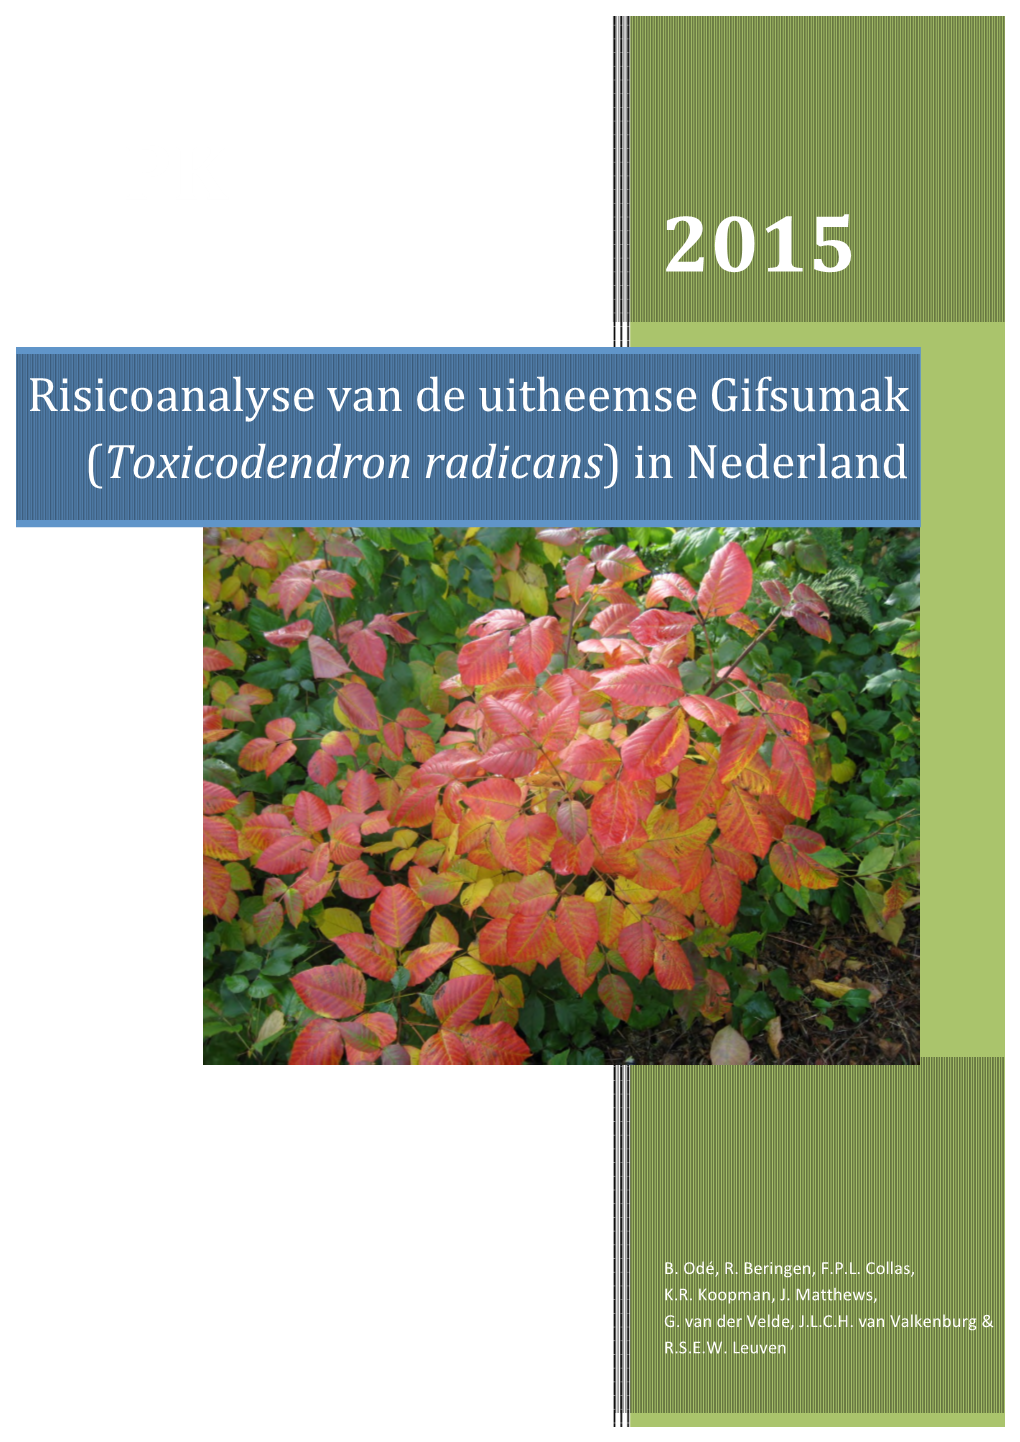 Toxicodendron Radicans) in Nederland